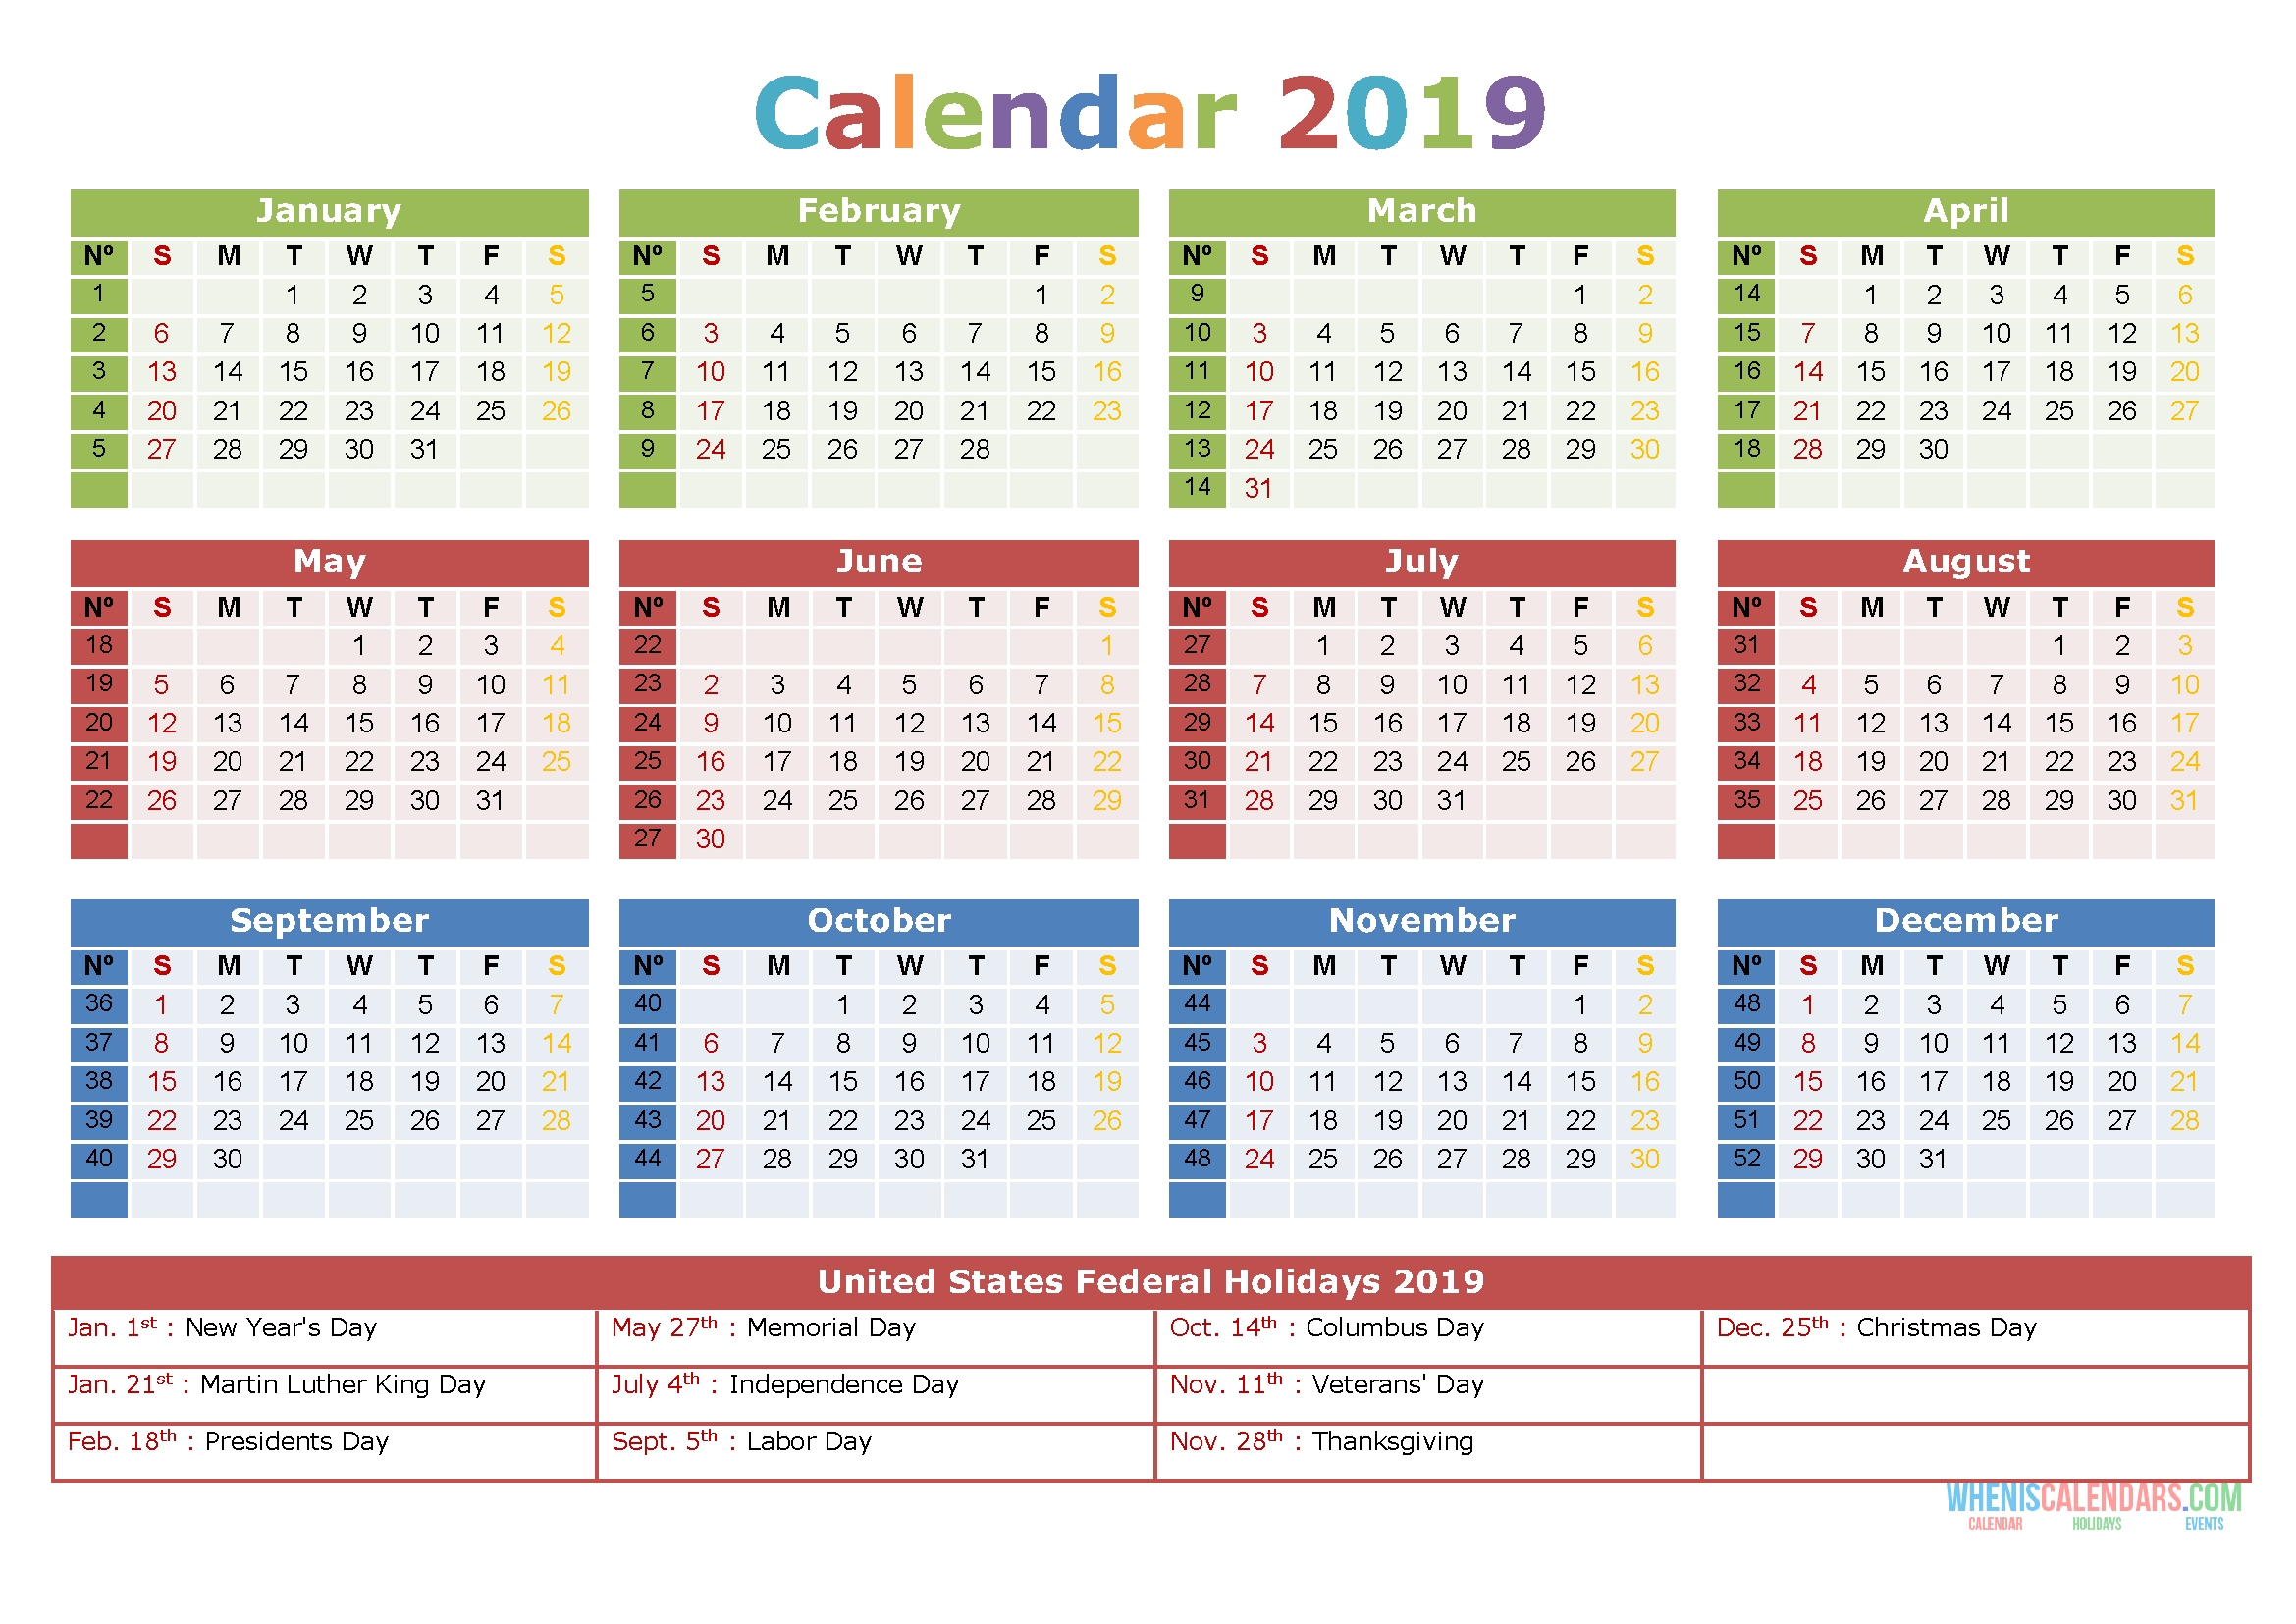 free-printable-yearly-calendars-2019-qualads-images-and-photos-finder